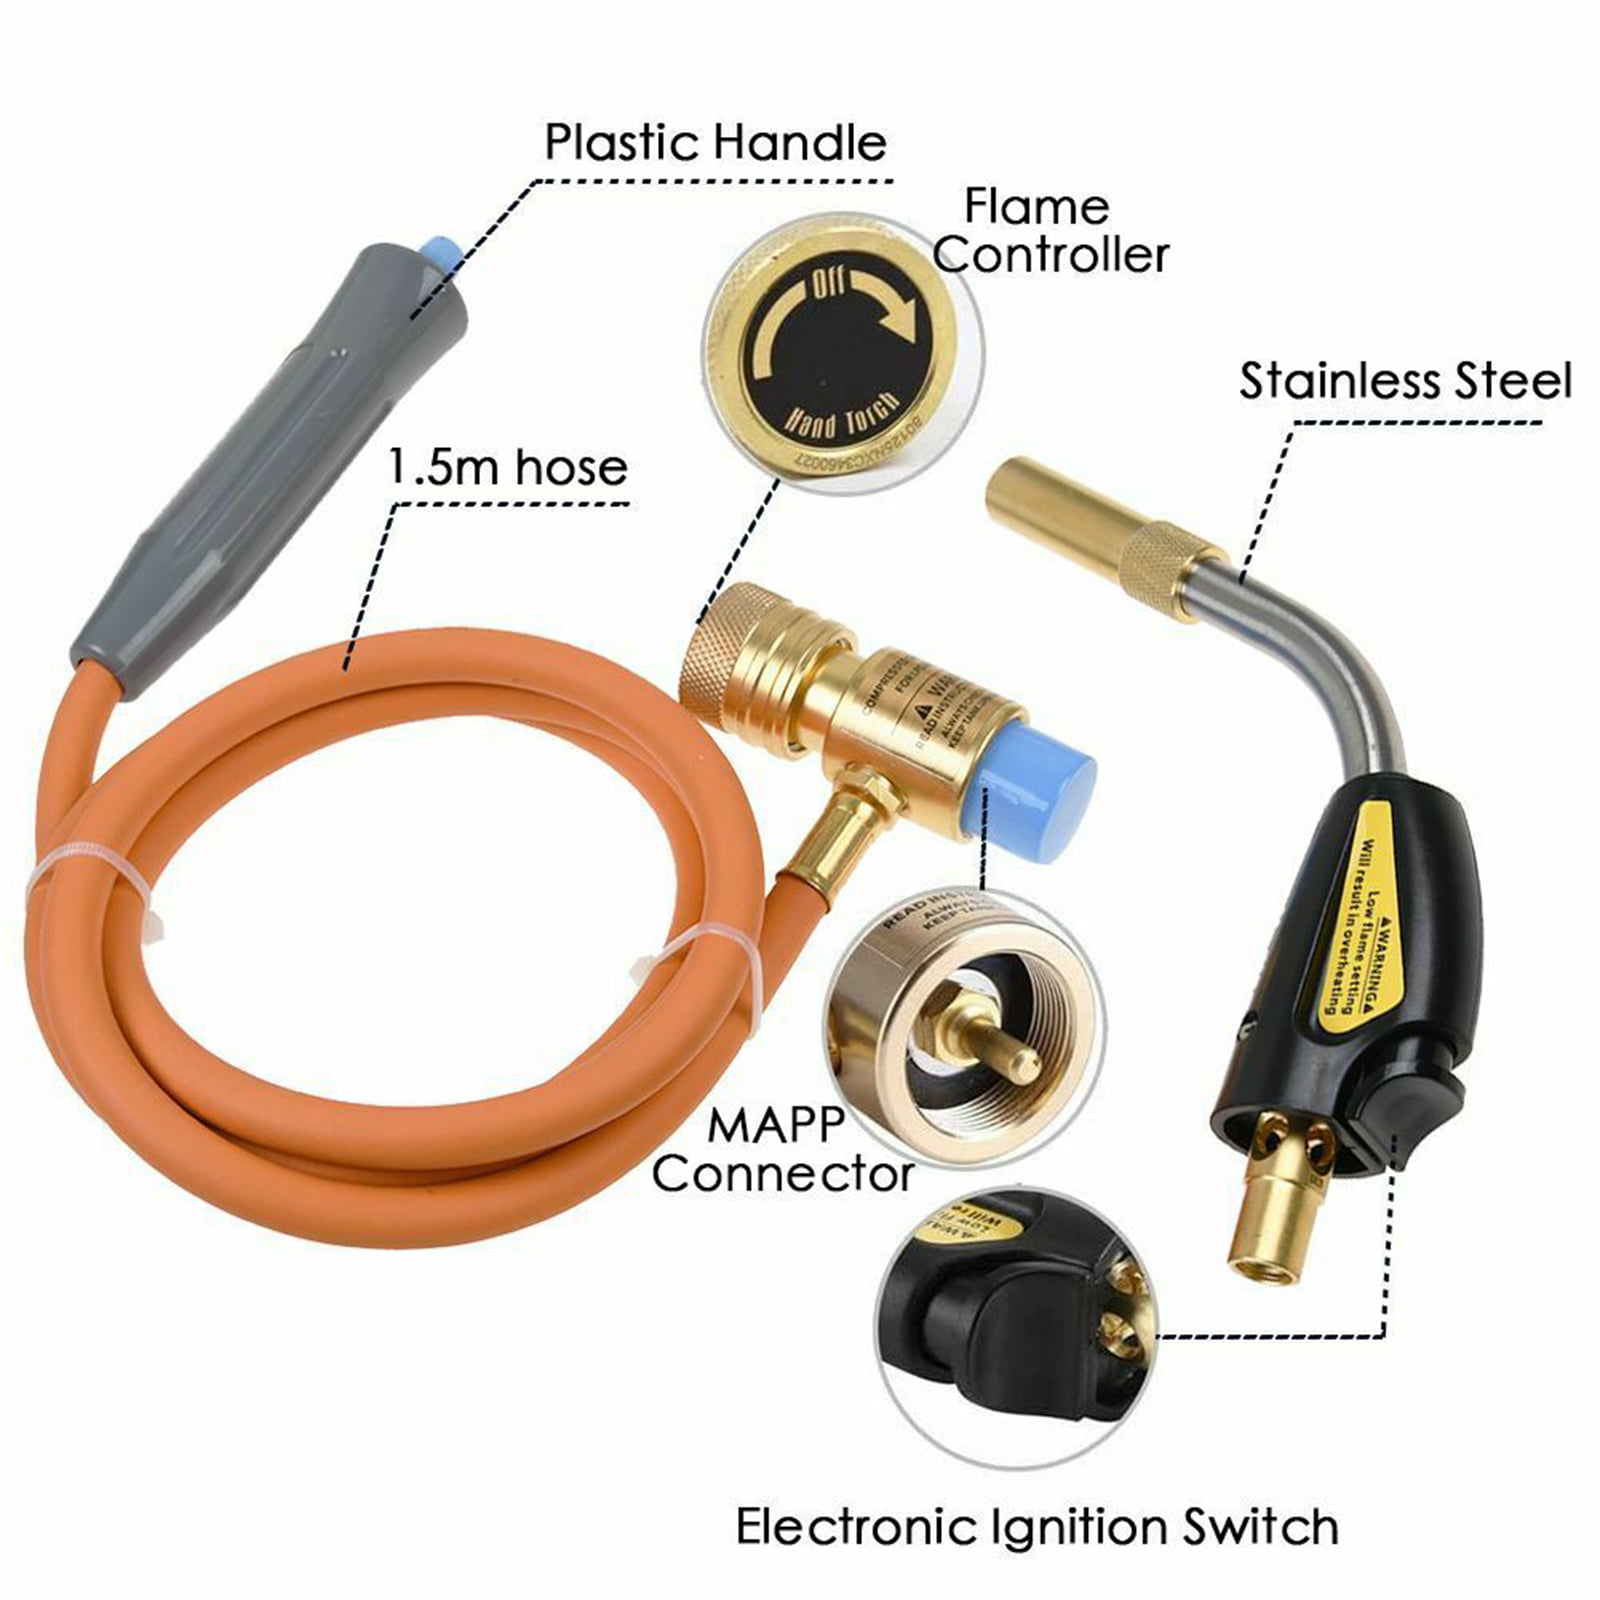 Gas Tank Not Included Gas Torch 1.5M 4.92Ft Hose Self-Ignition Burner Turbo for Cooking Soldering Welding Brass Ignition Head 